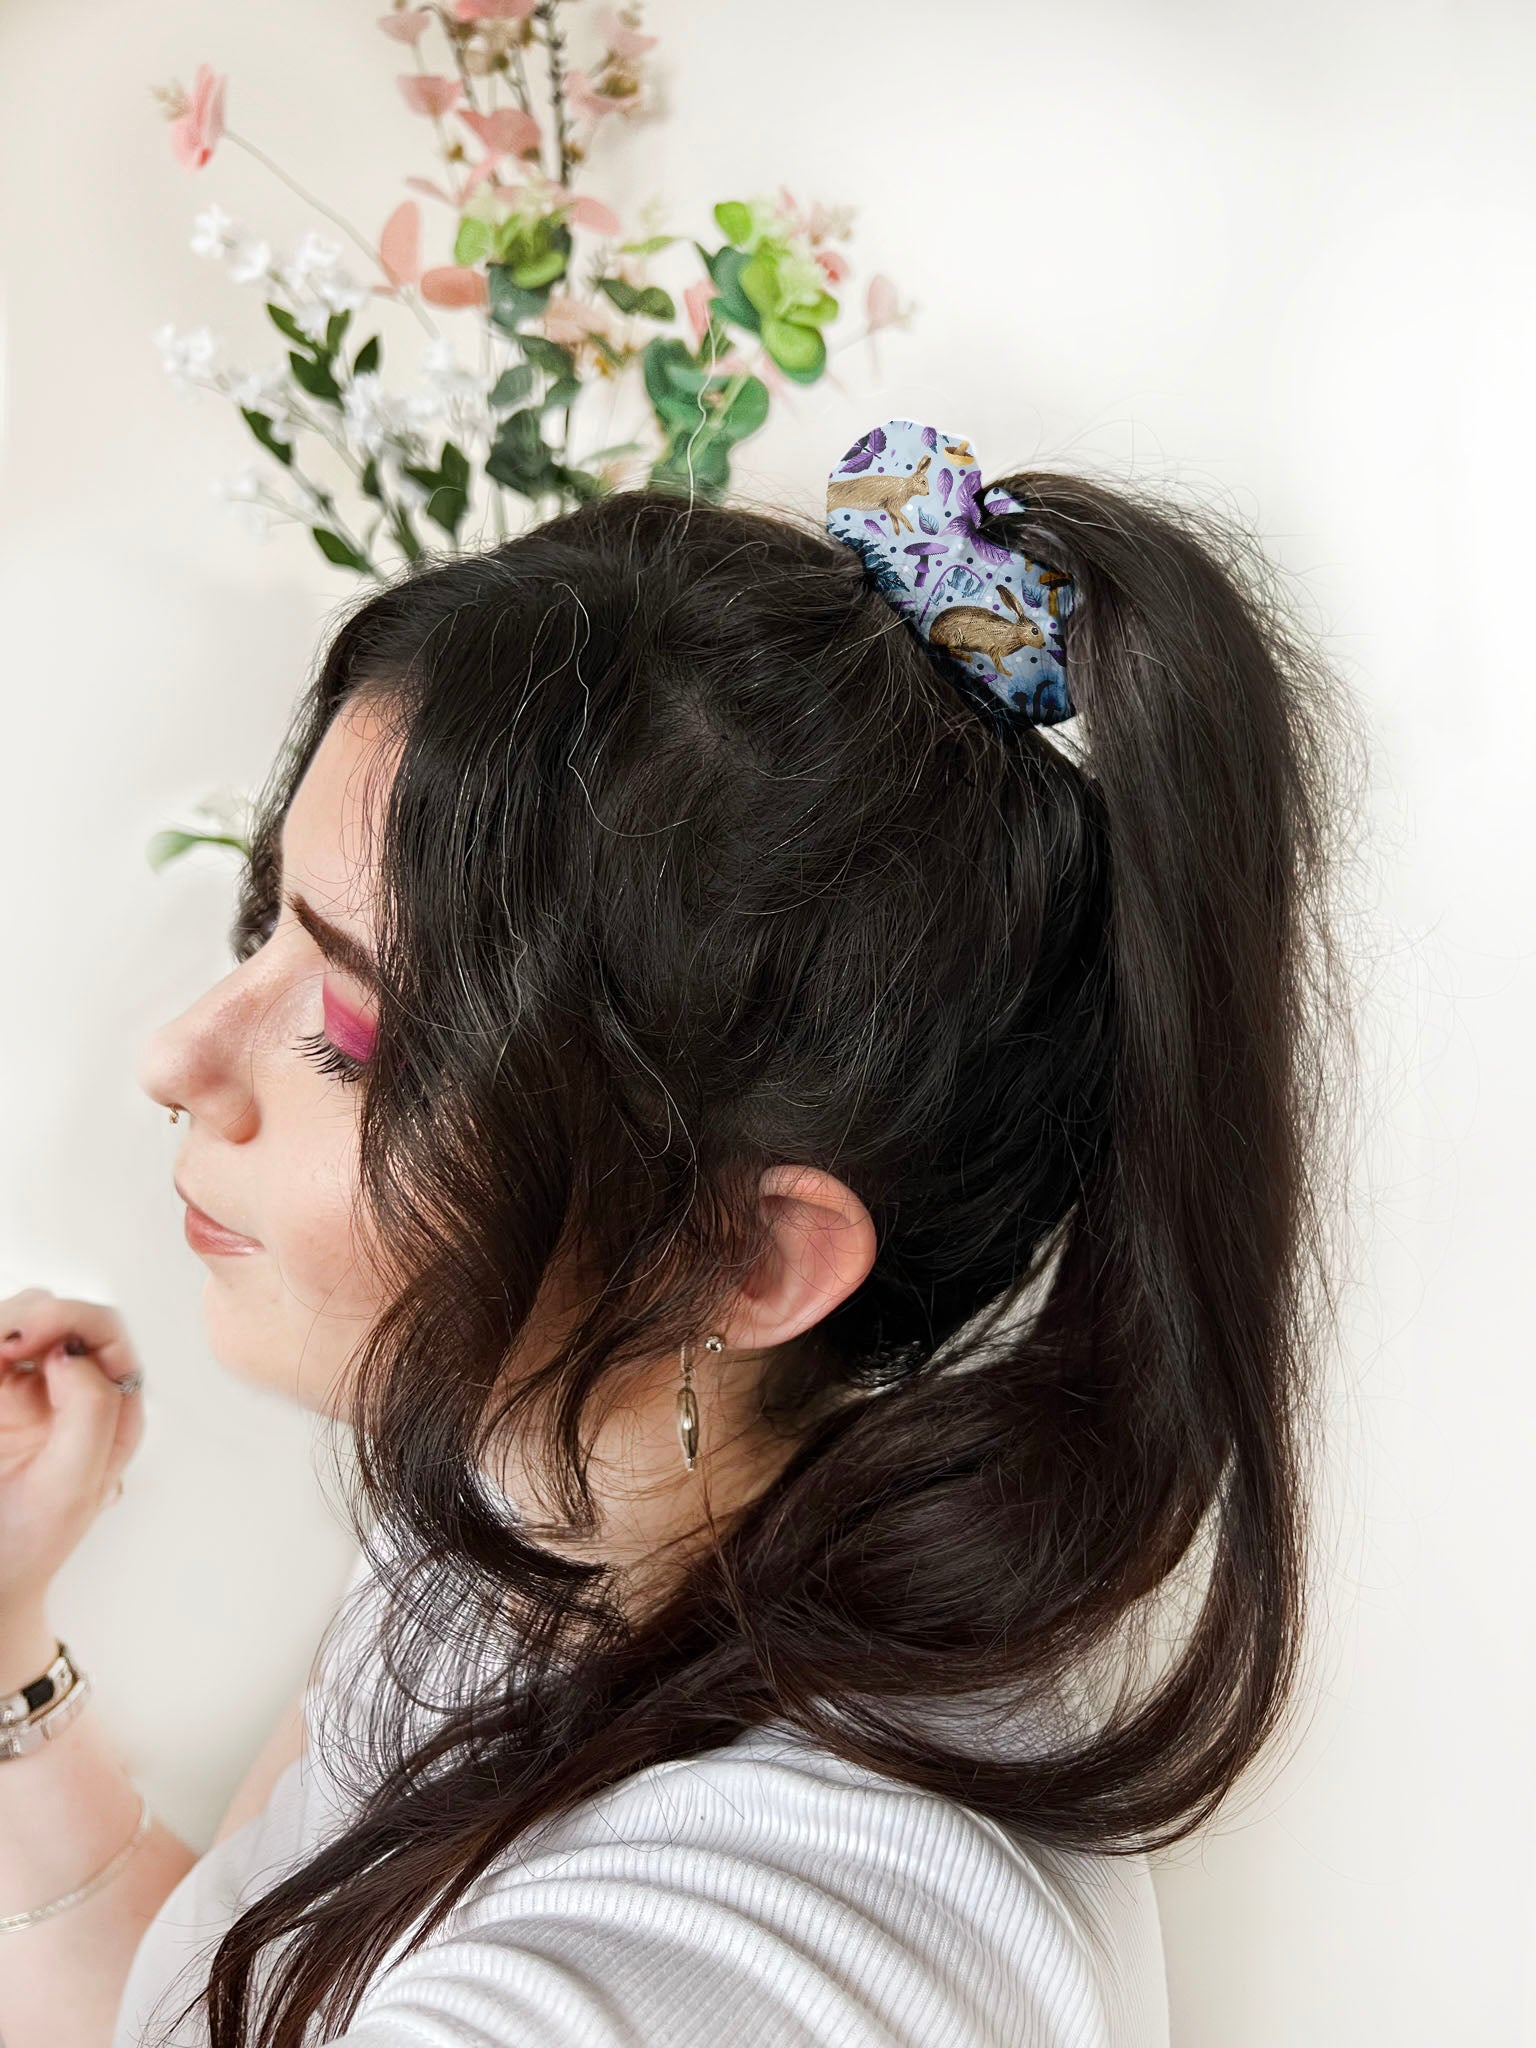 Dark haired girl faces the side with a hare patterned scrunchie holding a ponytail in on the back.